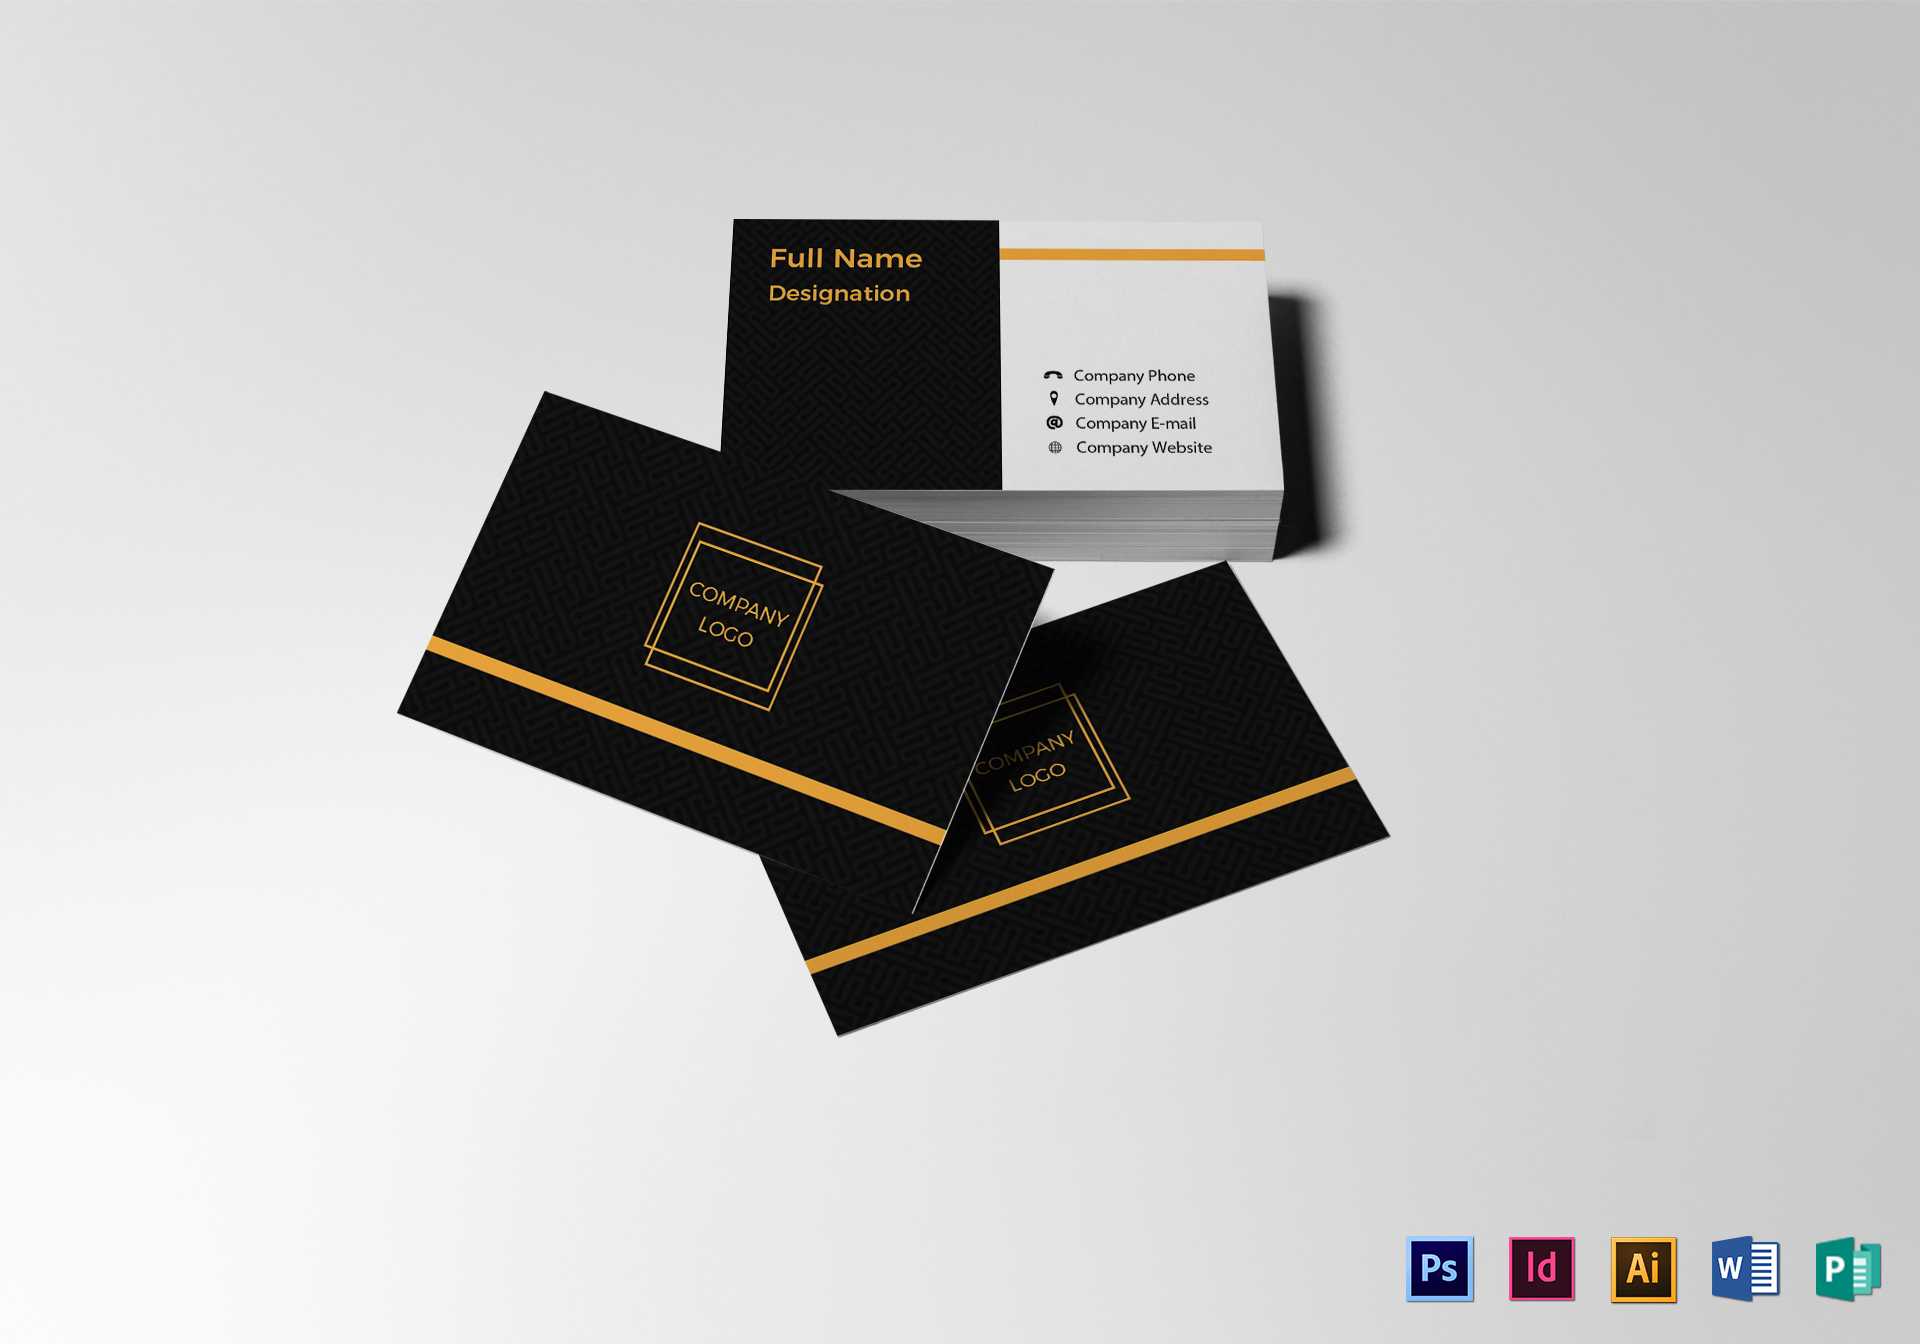 Blank Business Card Template With Regard To Plain Business Card Template